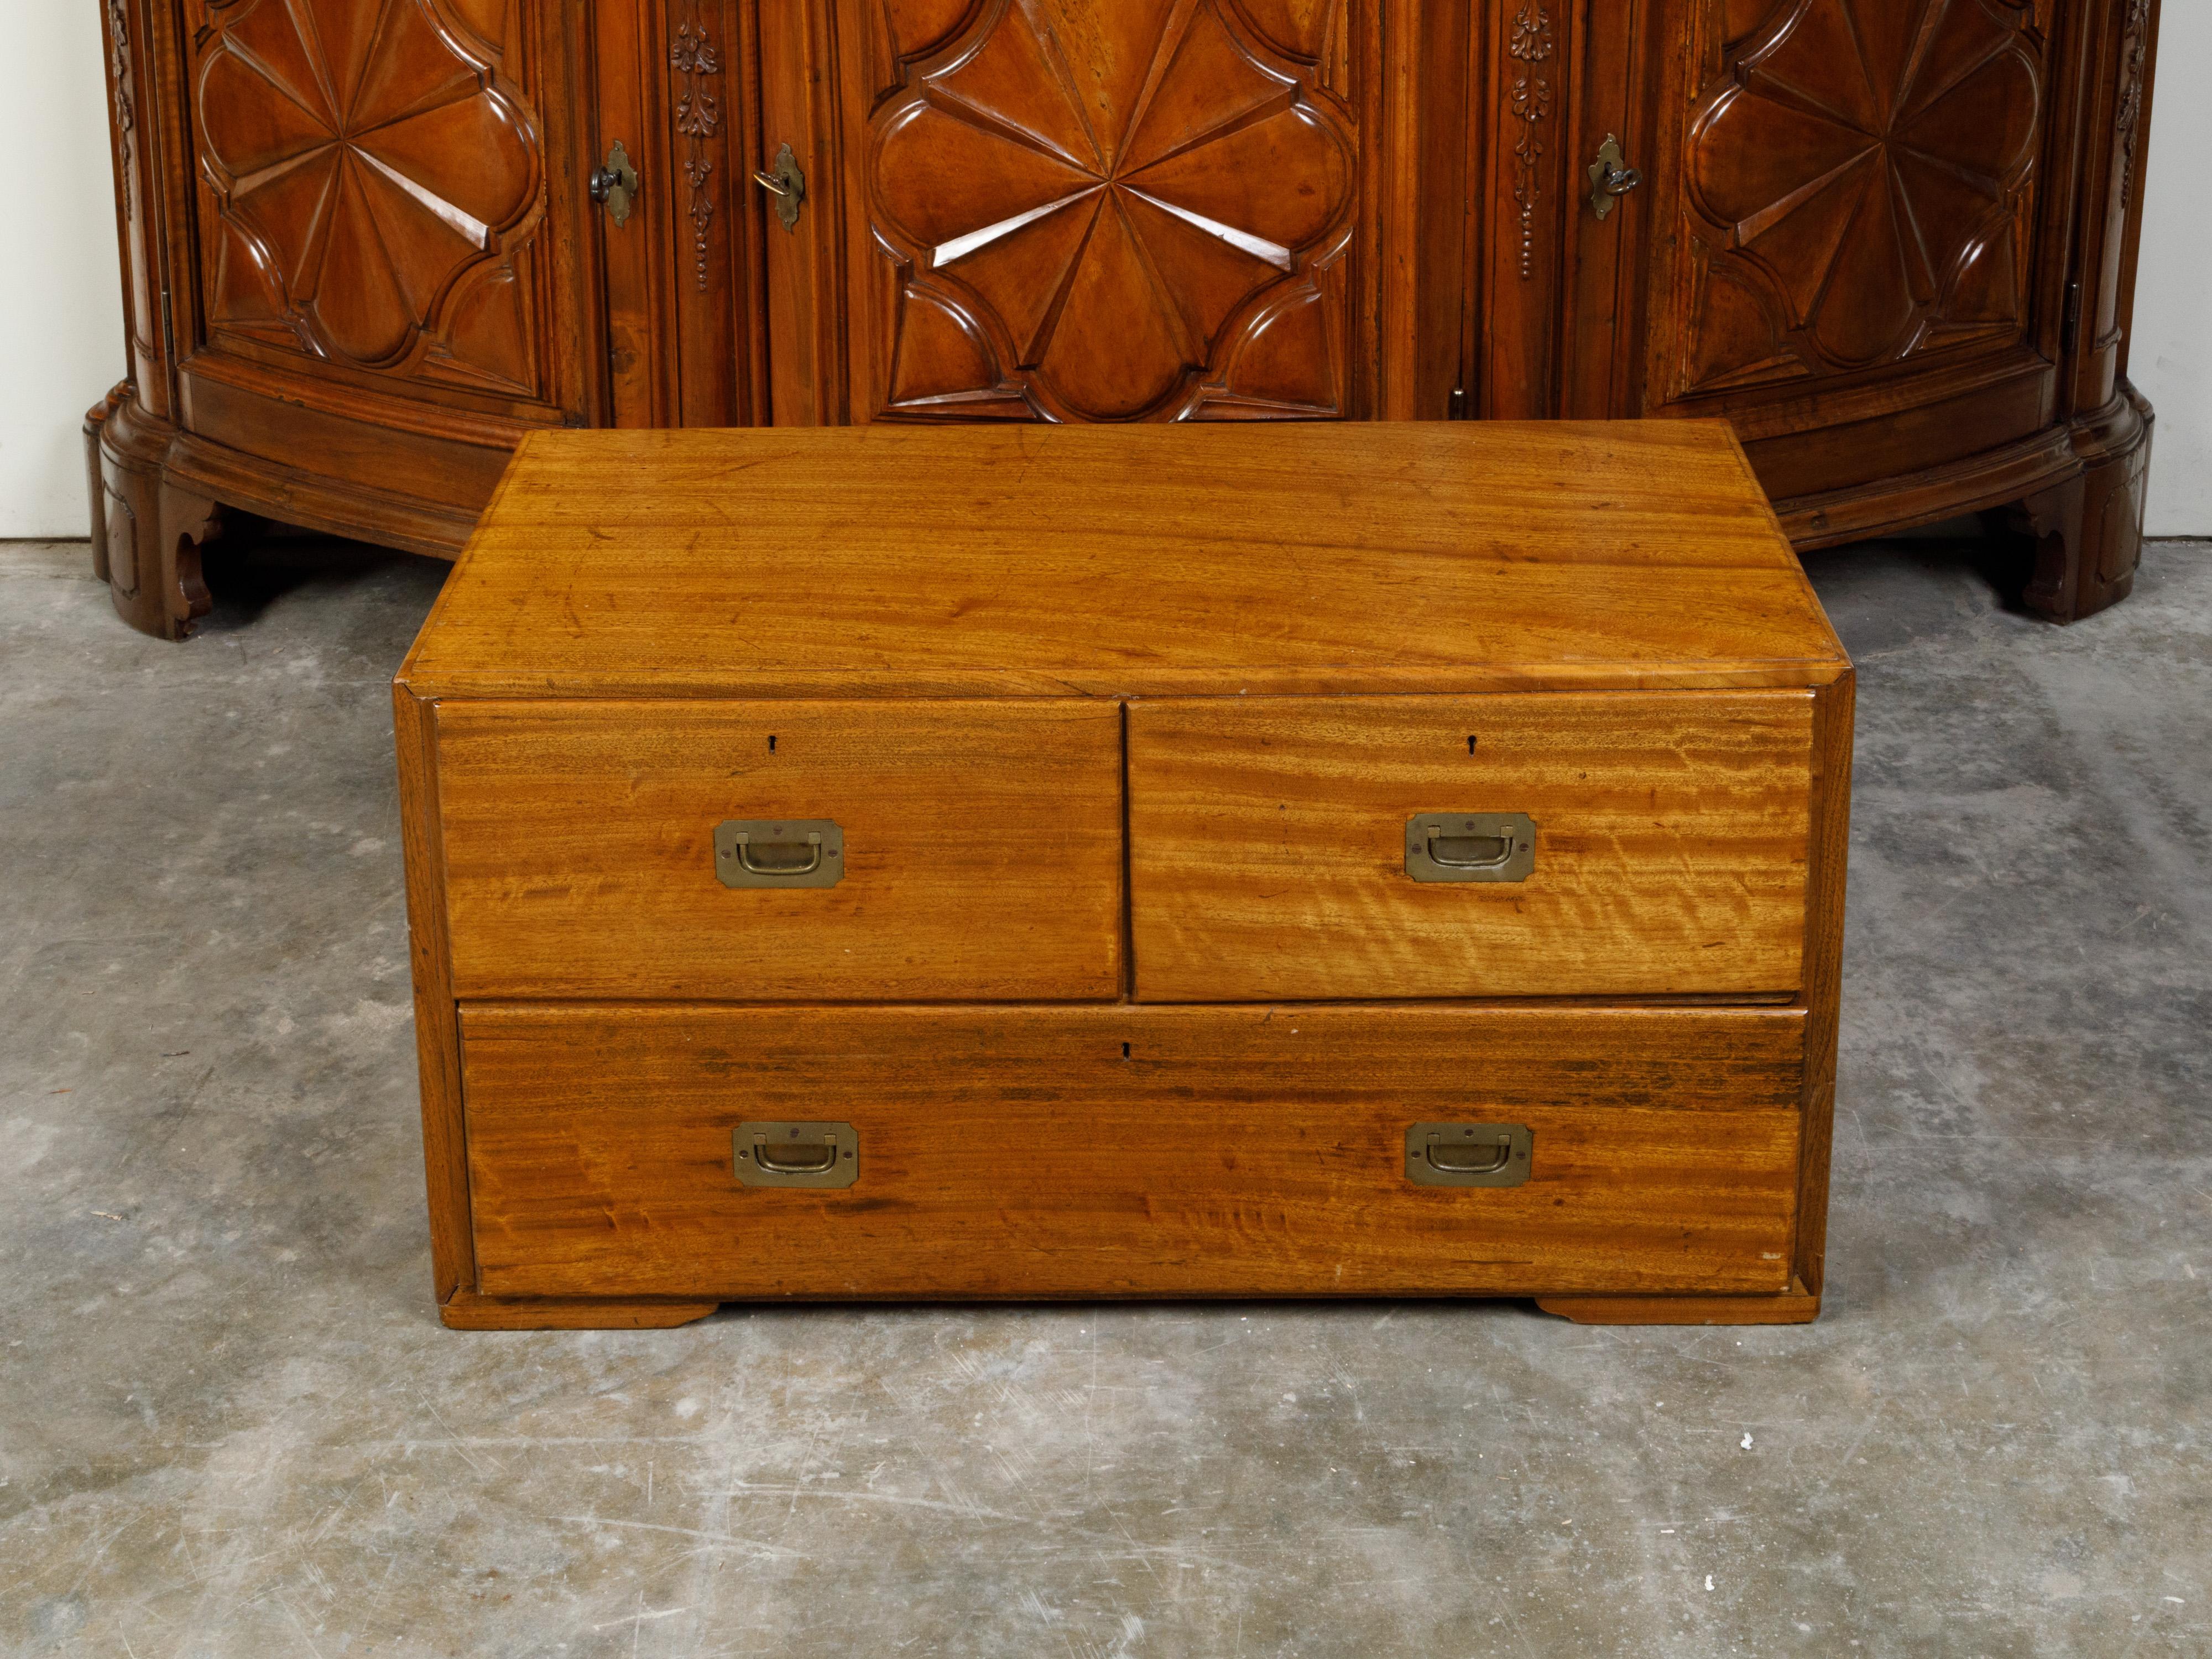 An English camphor wood Campaign low chest from the 19th century, with three drawers and inset brass hardware. Created in England during the 19th century, this Campaign camphor wood chest features a rectangular top sitting above three drawers (two